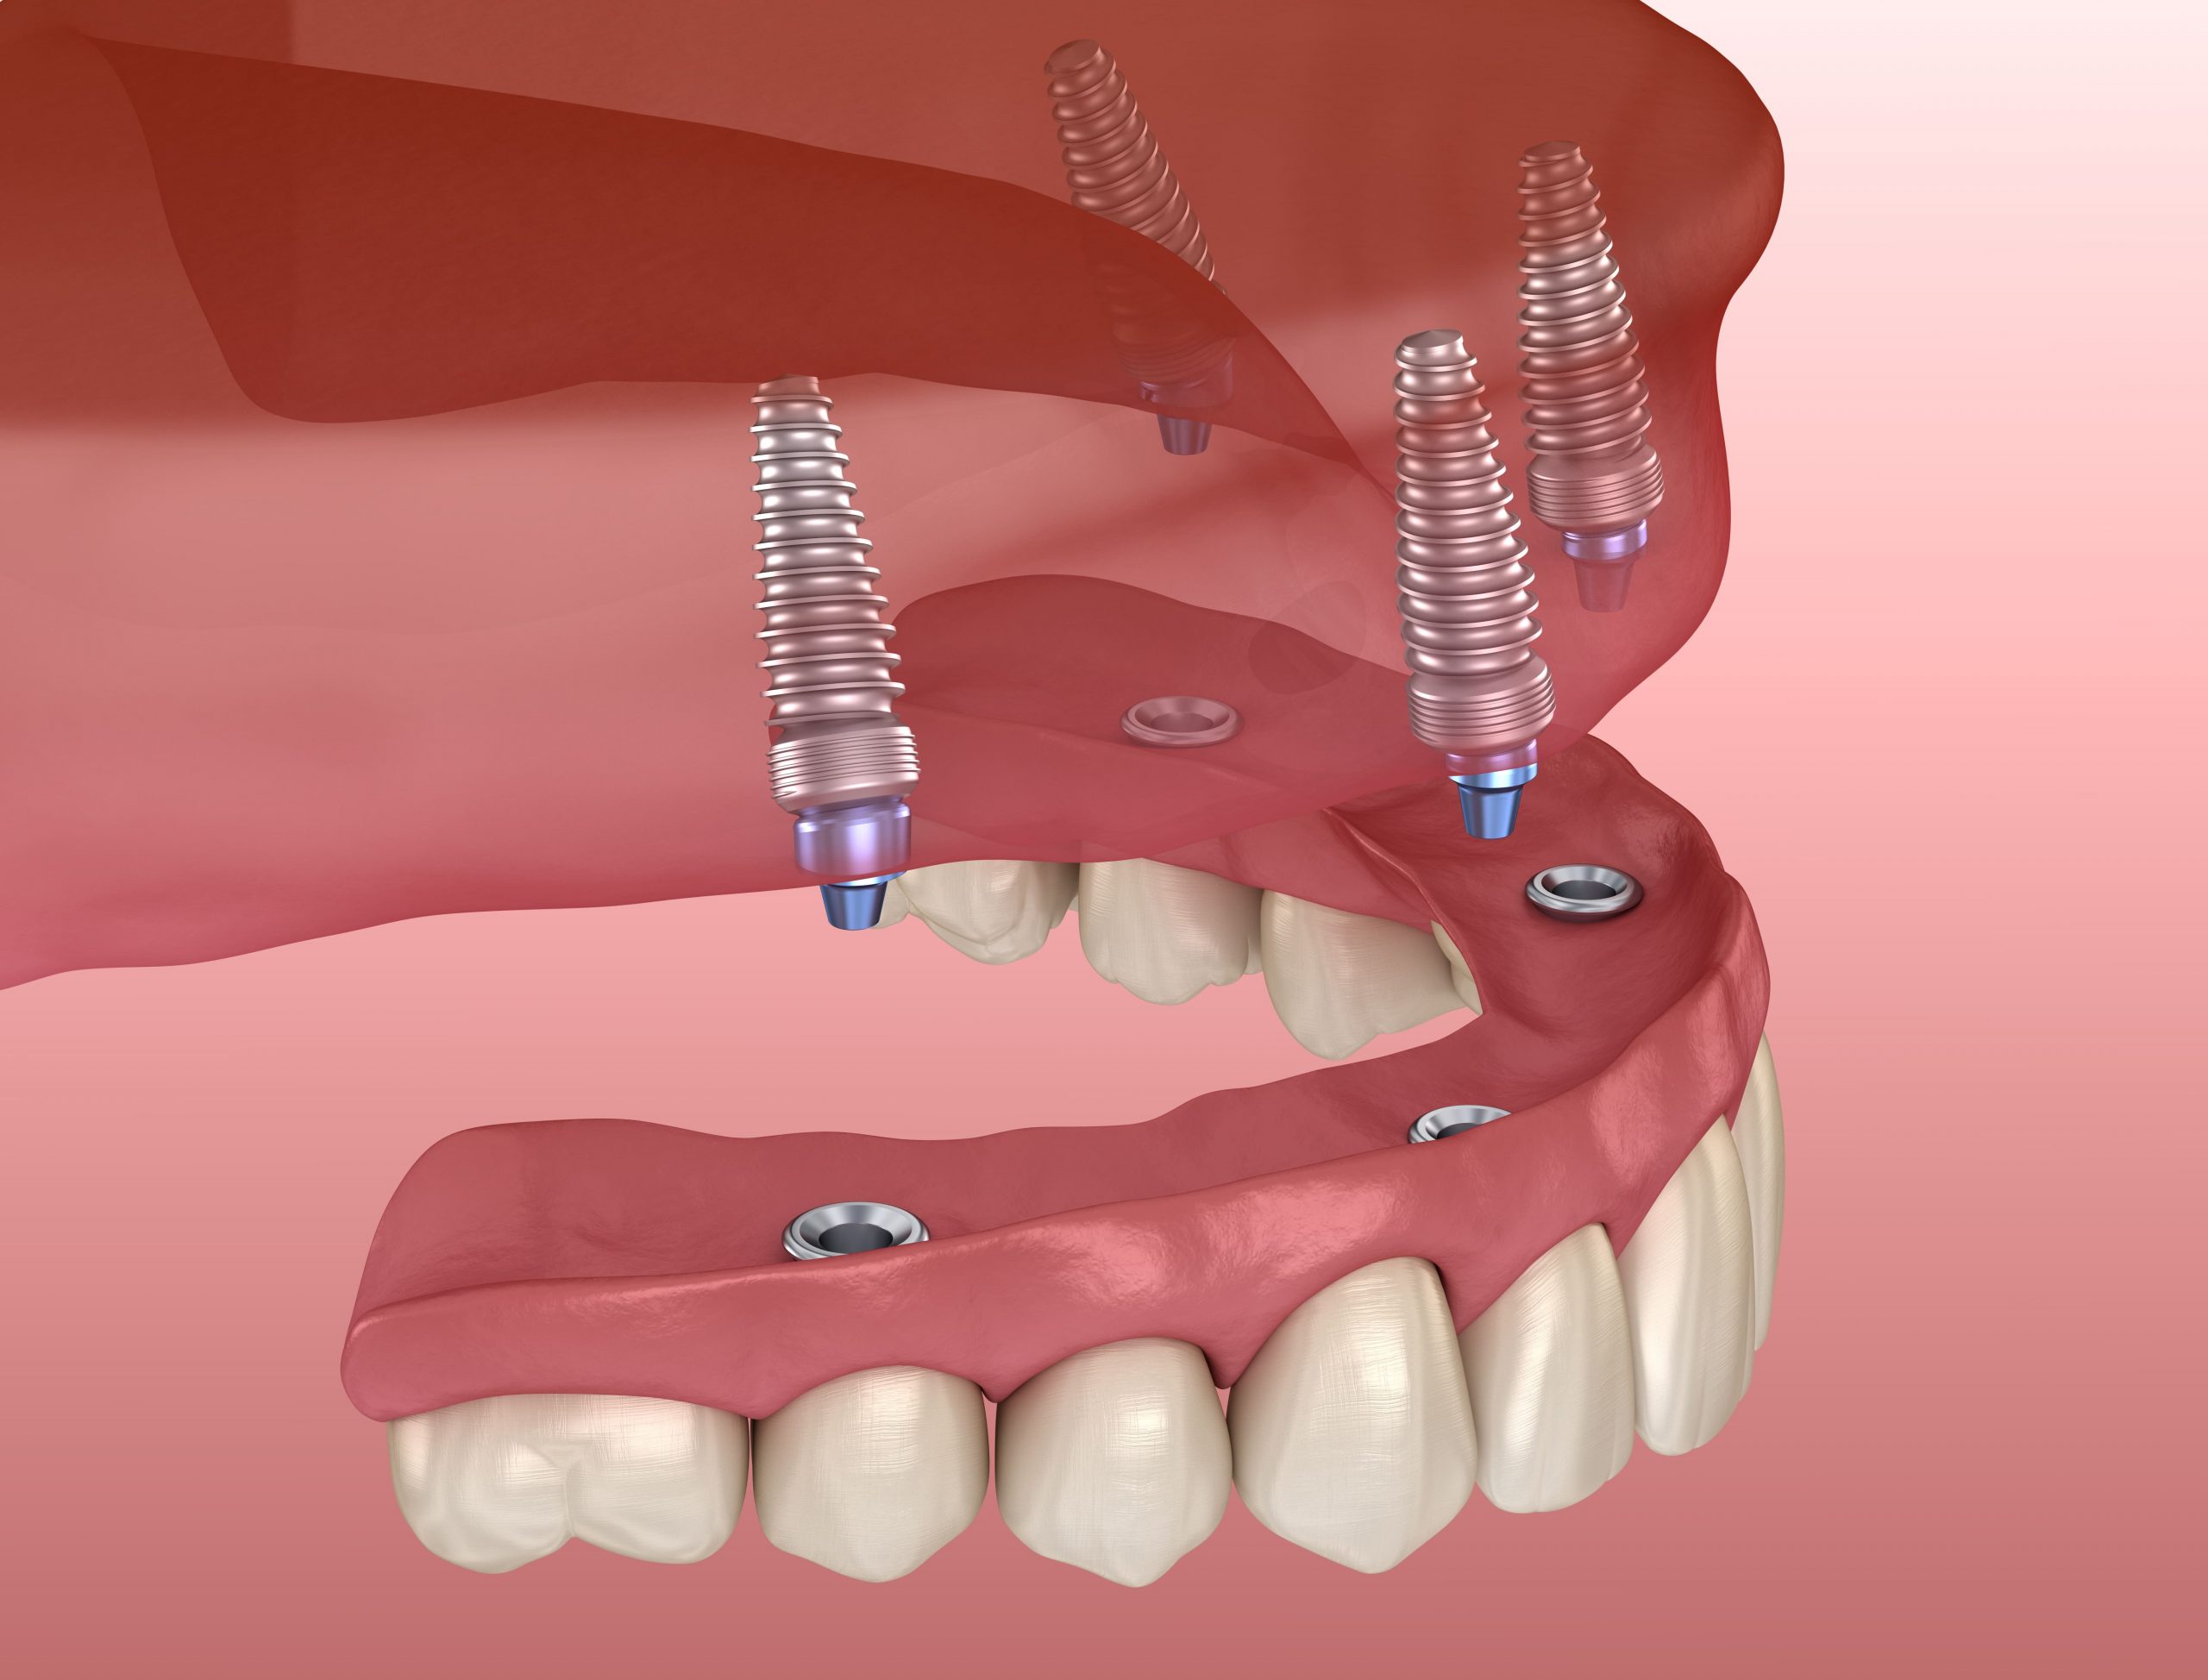 Advantages of All On 4 Dental Implants